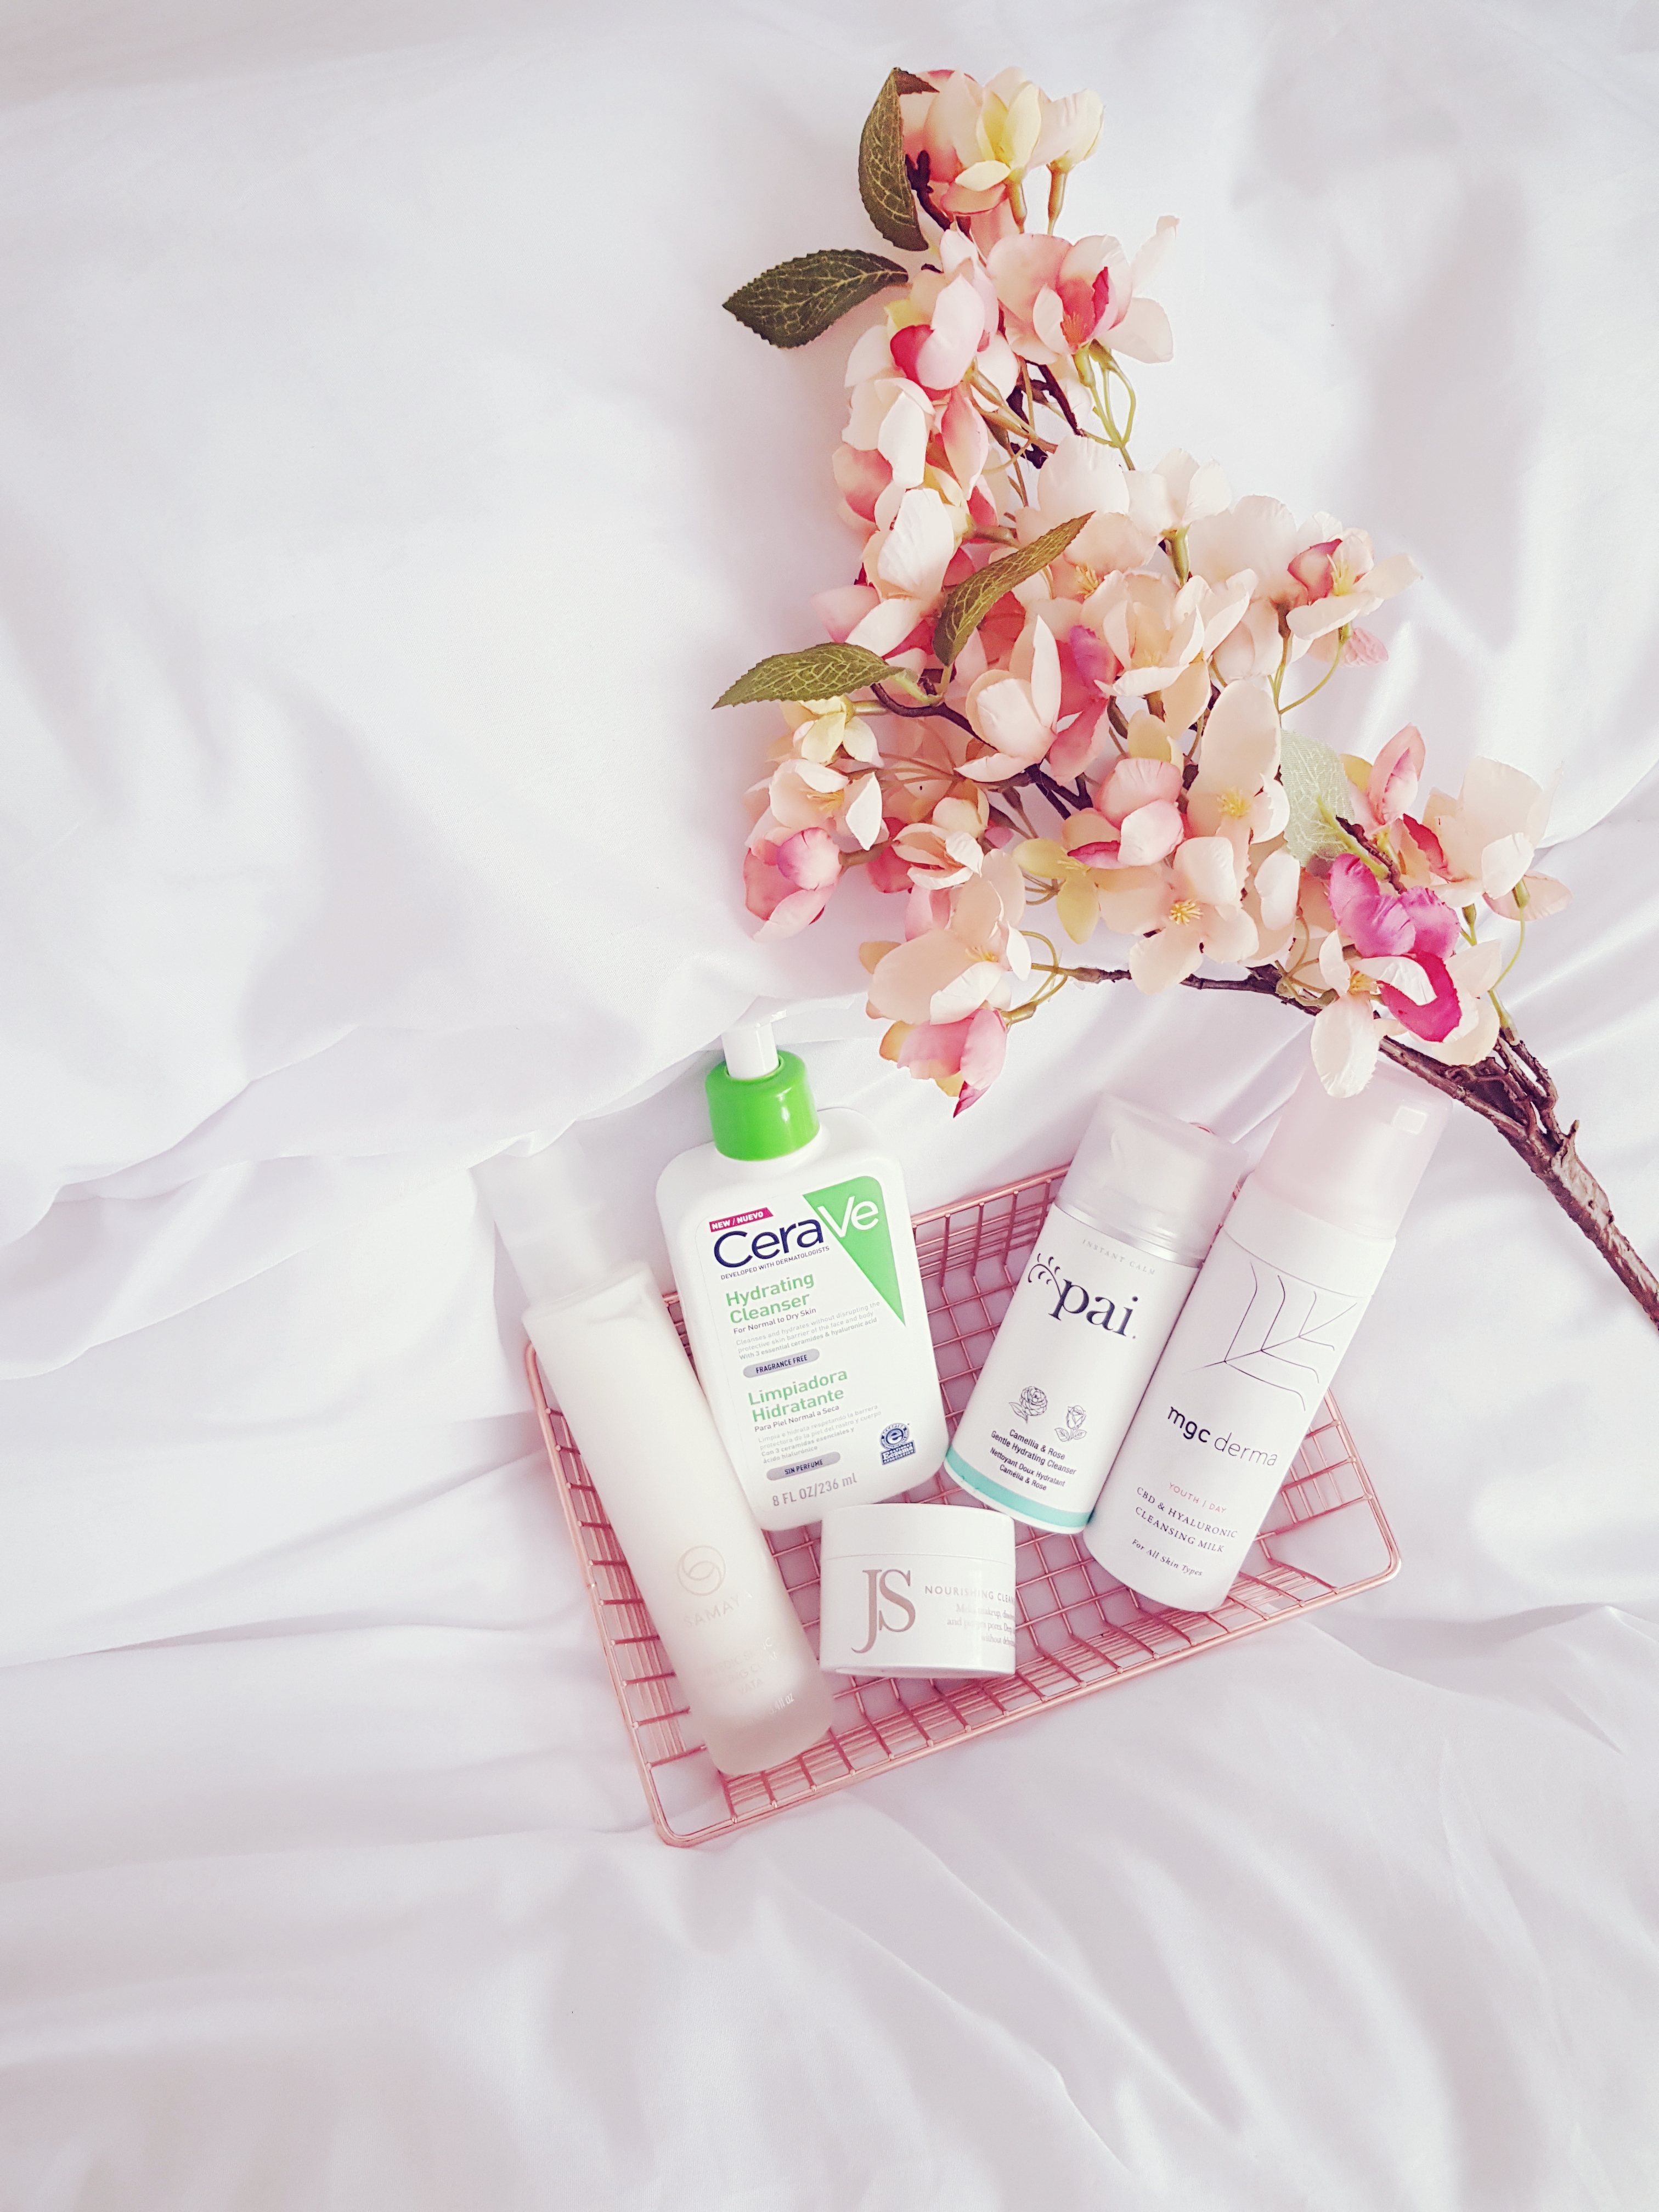 Cleansers for dry skin - Ms Tantrum Blog